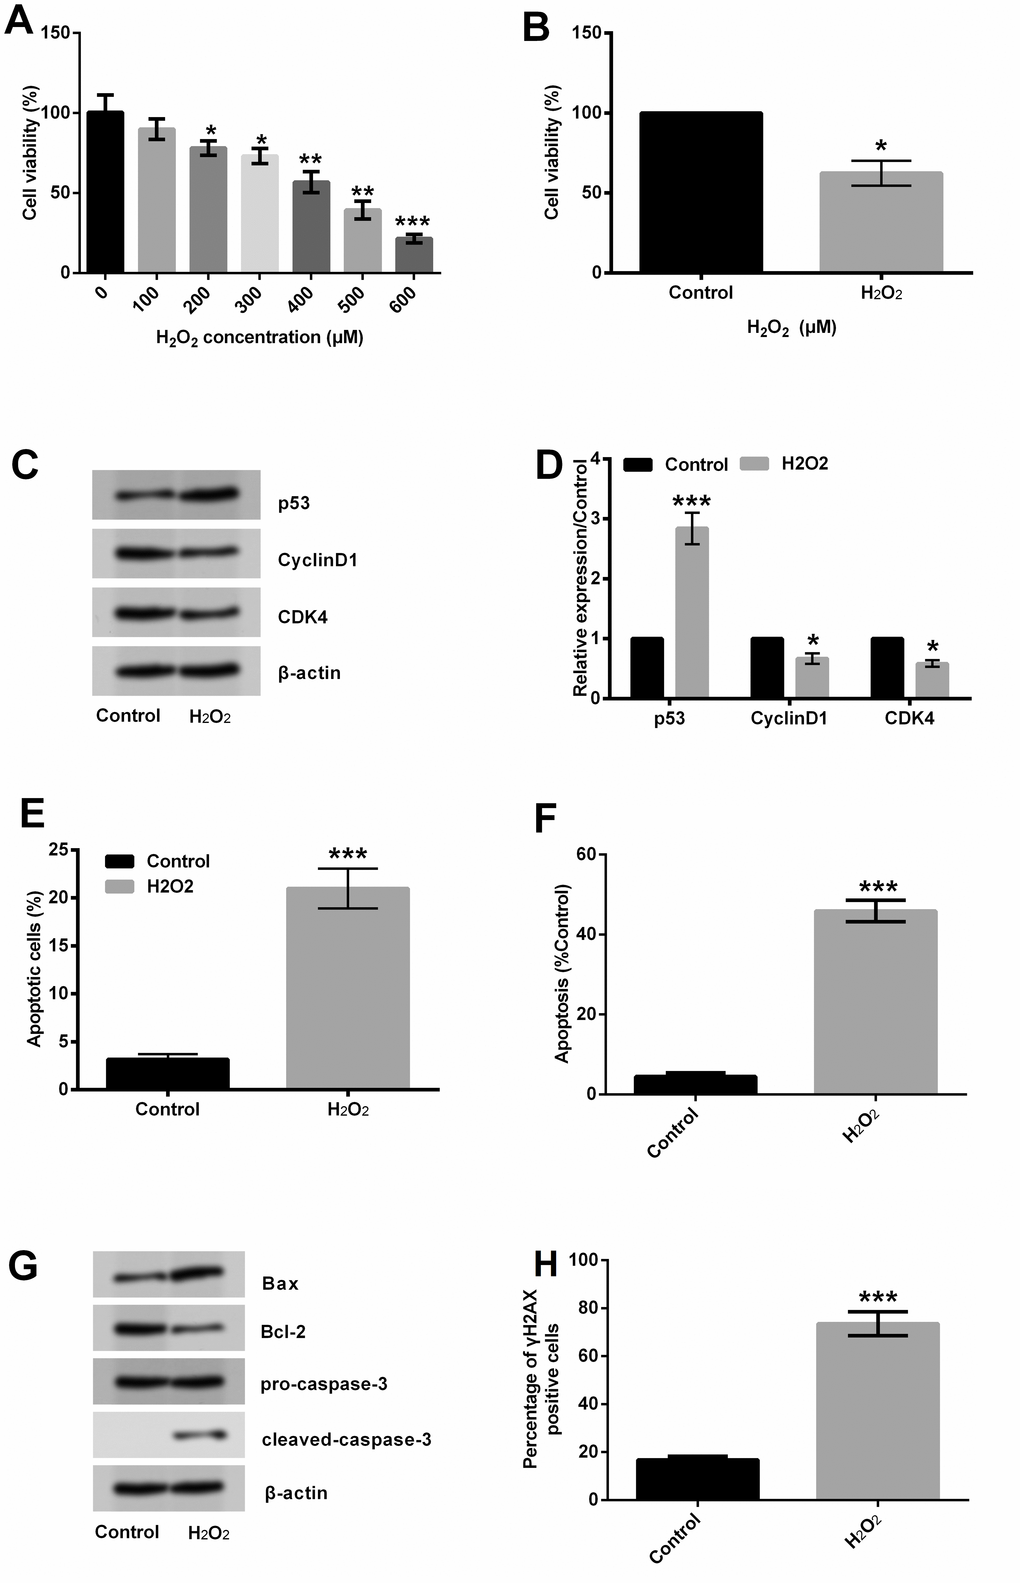 H2O2 induced HLEC injury. HLEC SRA01/04 cells were treated with 400 μM H2O2 for 1 h, and non-treated cells were acted as control. (A, B) Cell viability was measured by CCK-8 assay. (C, D) Expression of p53, cyclinD1 and CDK4 was testified by Western blot analysis. (E, F) Percentage of apoptotic cells was quantified by flow cytometry assay and TUNEL assay. (G) Expression of proteins related to apoptosis was detected by Western blot analysis. (H) γH2AX staining for detection of DNA levels. Data are shown as the mean ± SD of three independent experiments. *, P P P 